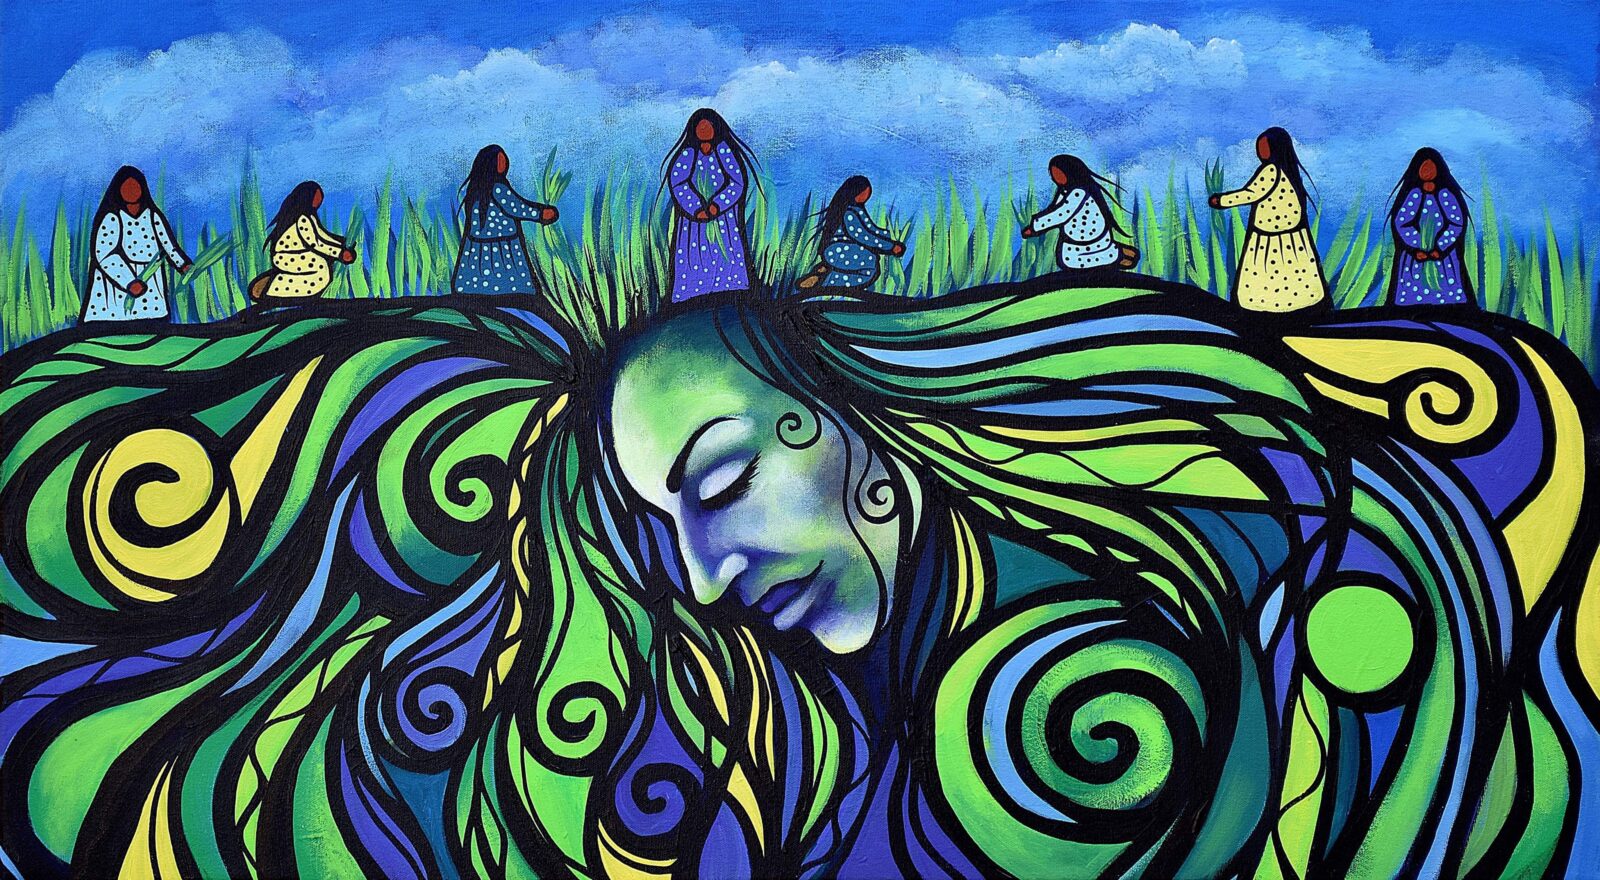 Harvesting the Hair of Mother Earth